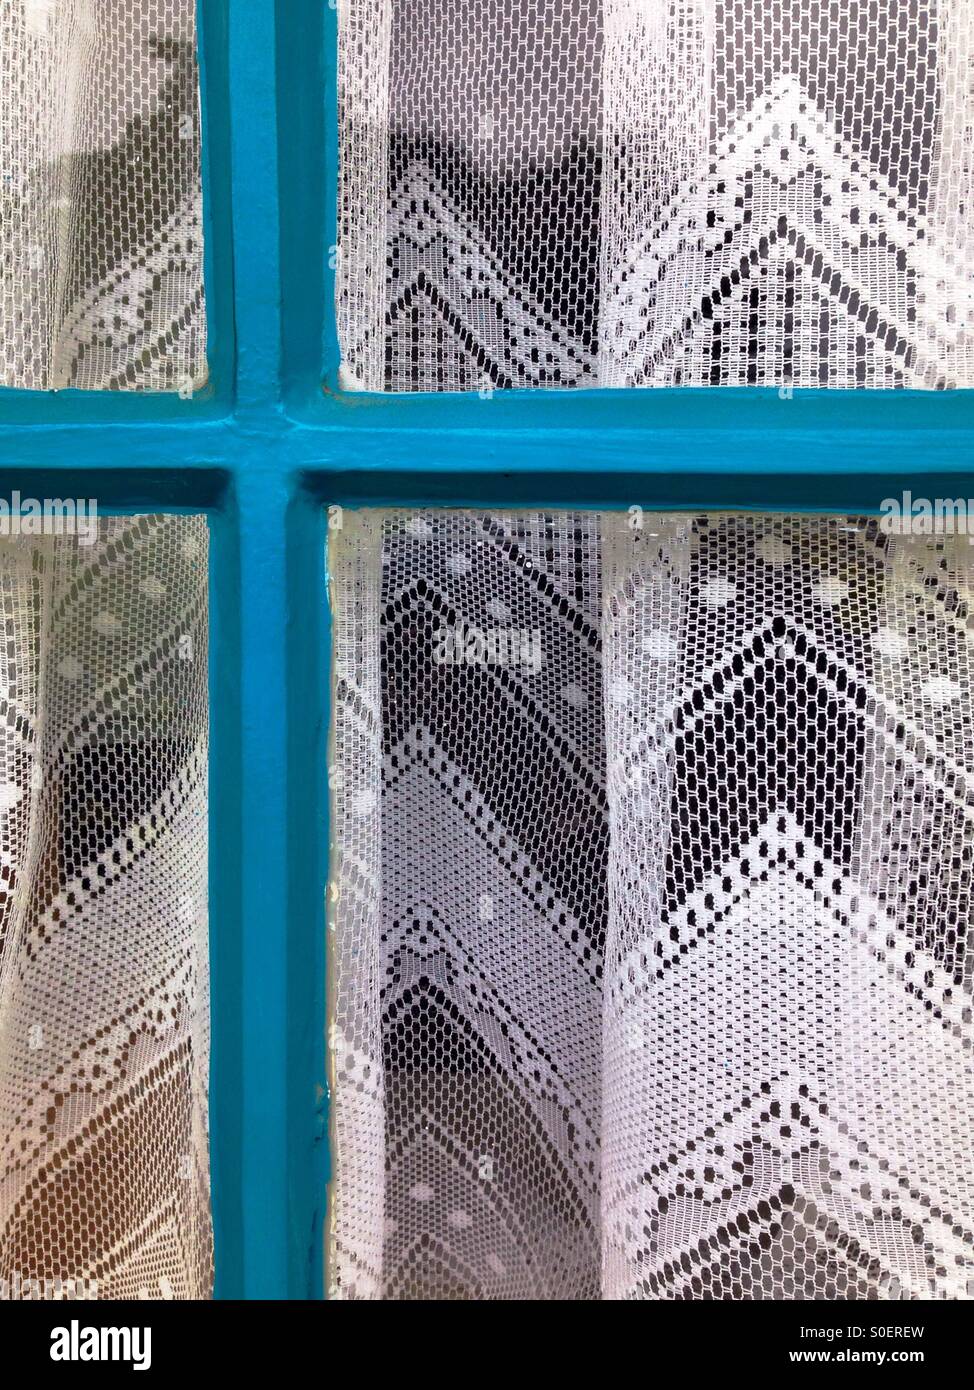 Lace curtain behind blue window frame Stock Photo